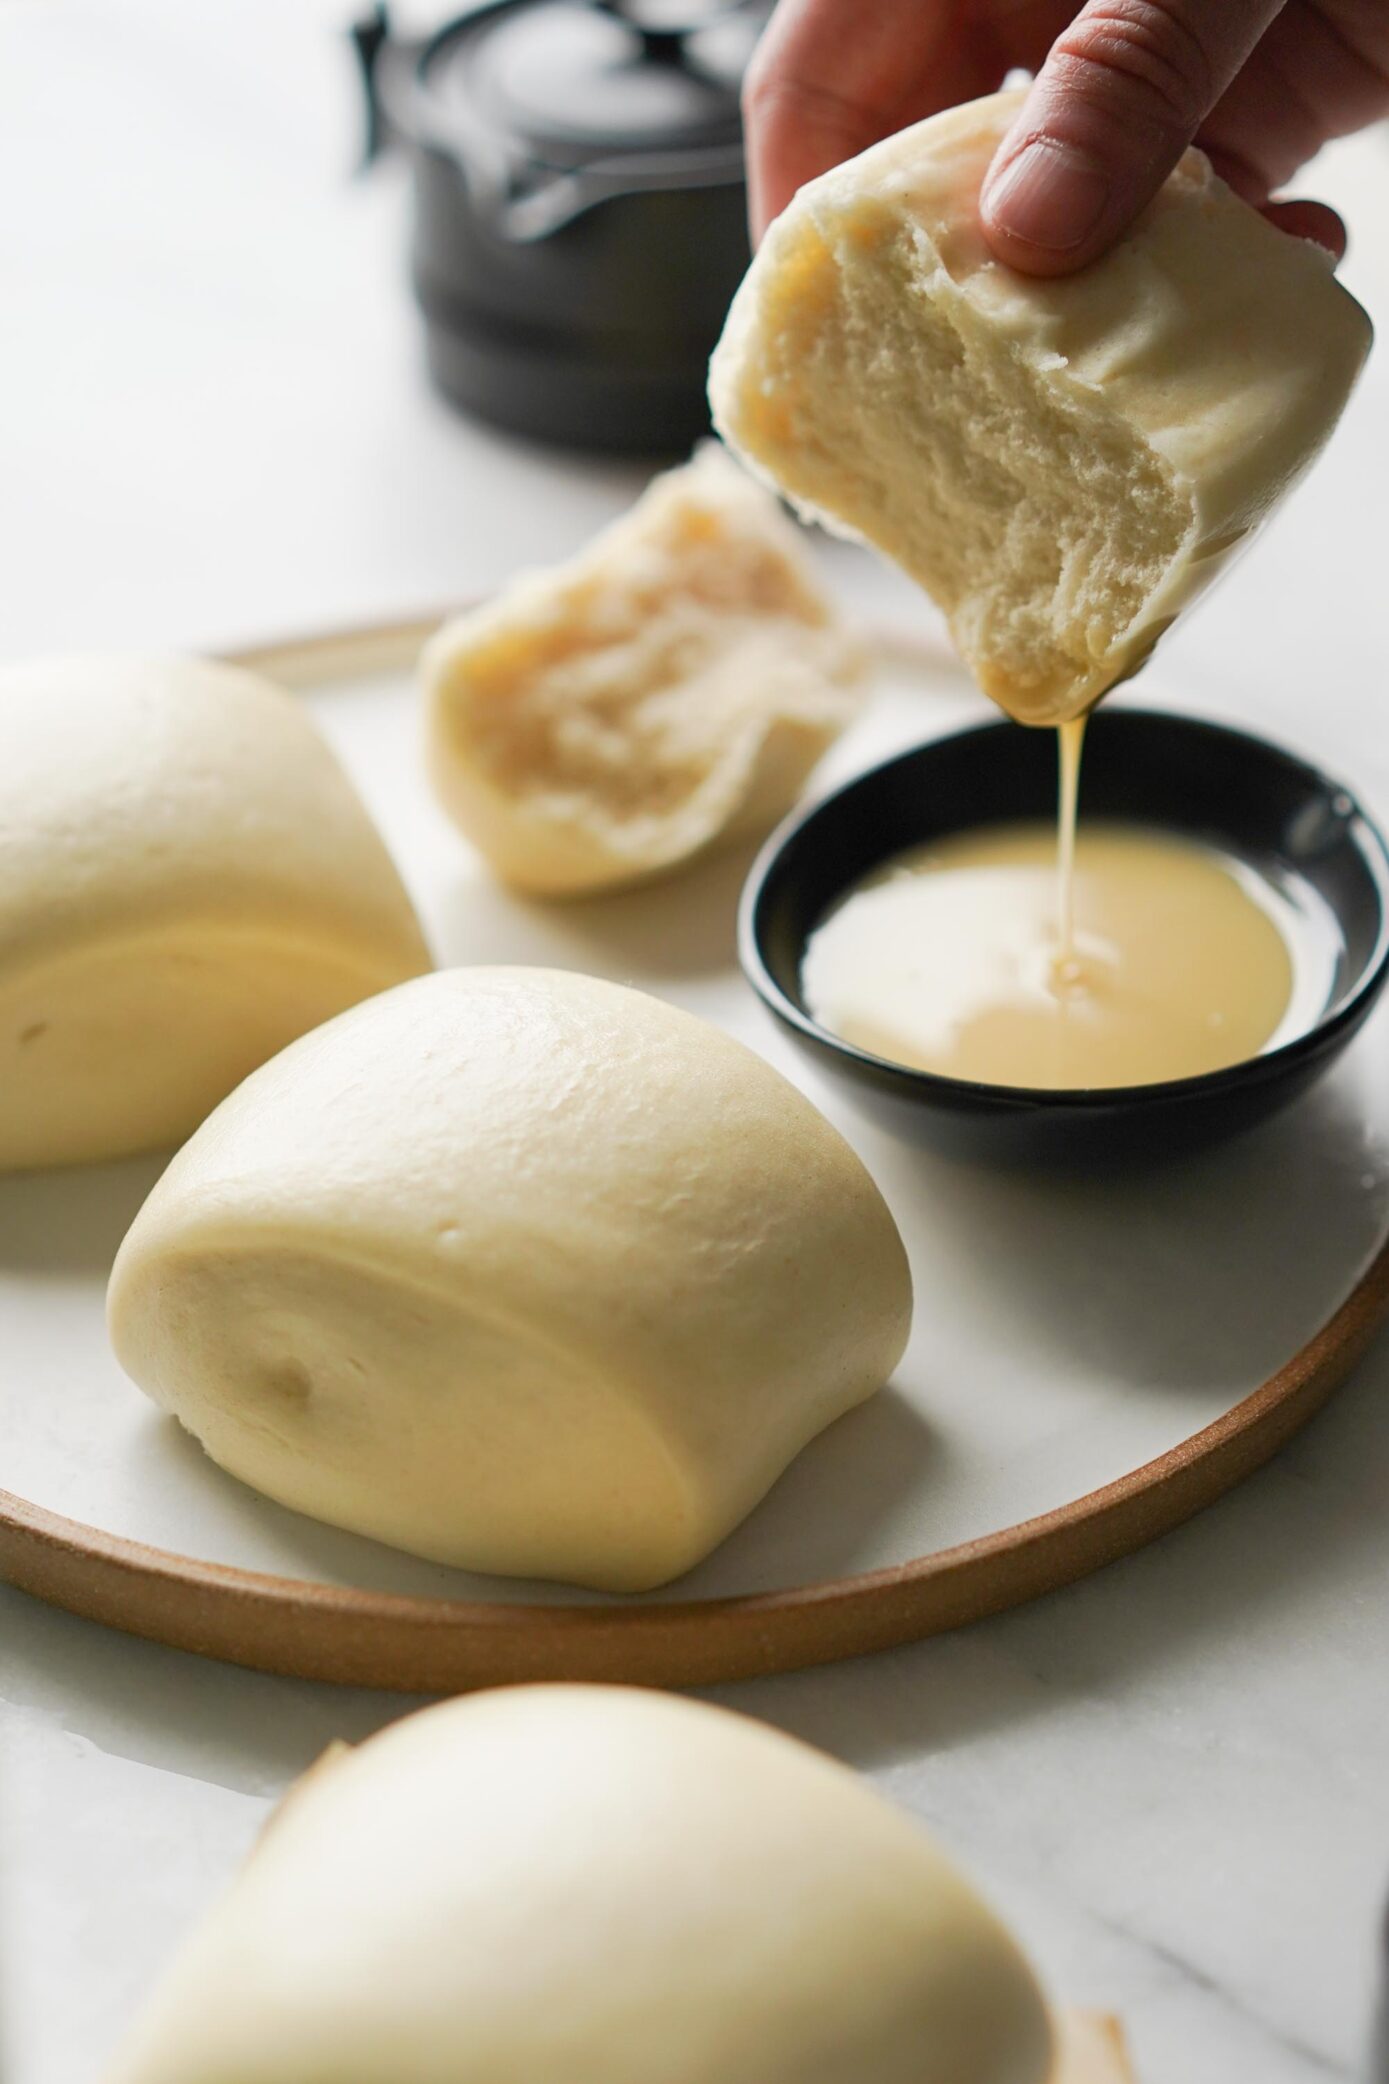 Mantou Recipe (Fluffy Chinese Steamed Buns) - Hungry Huy